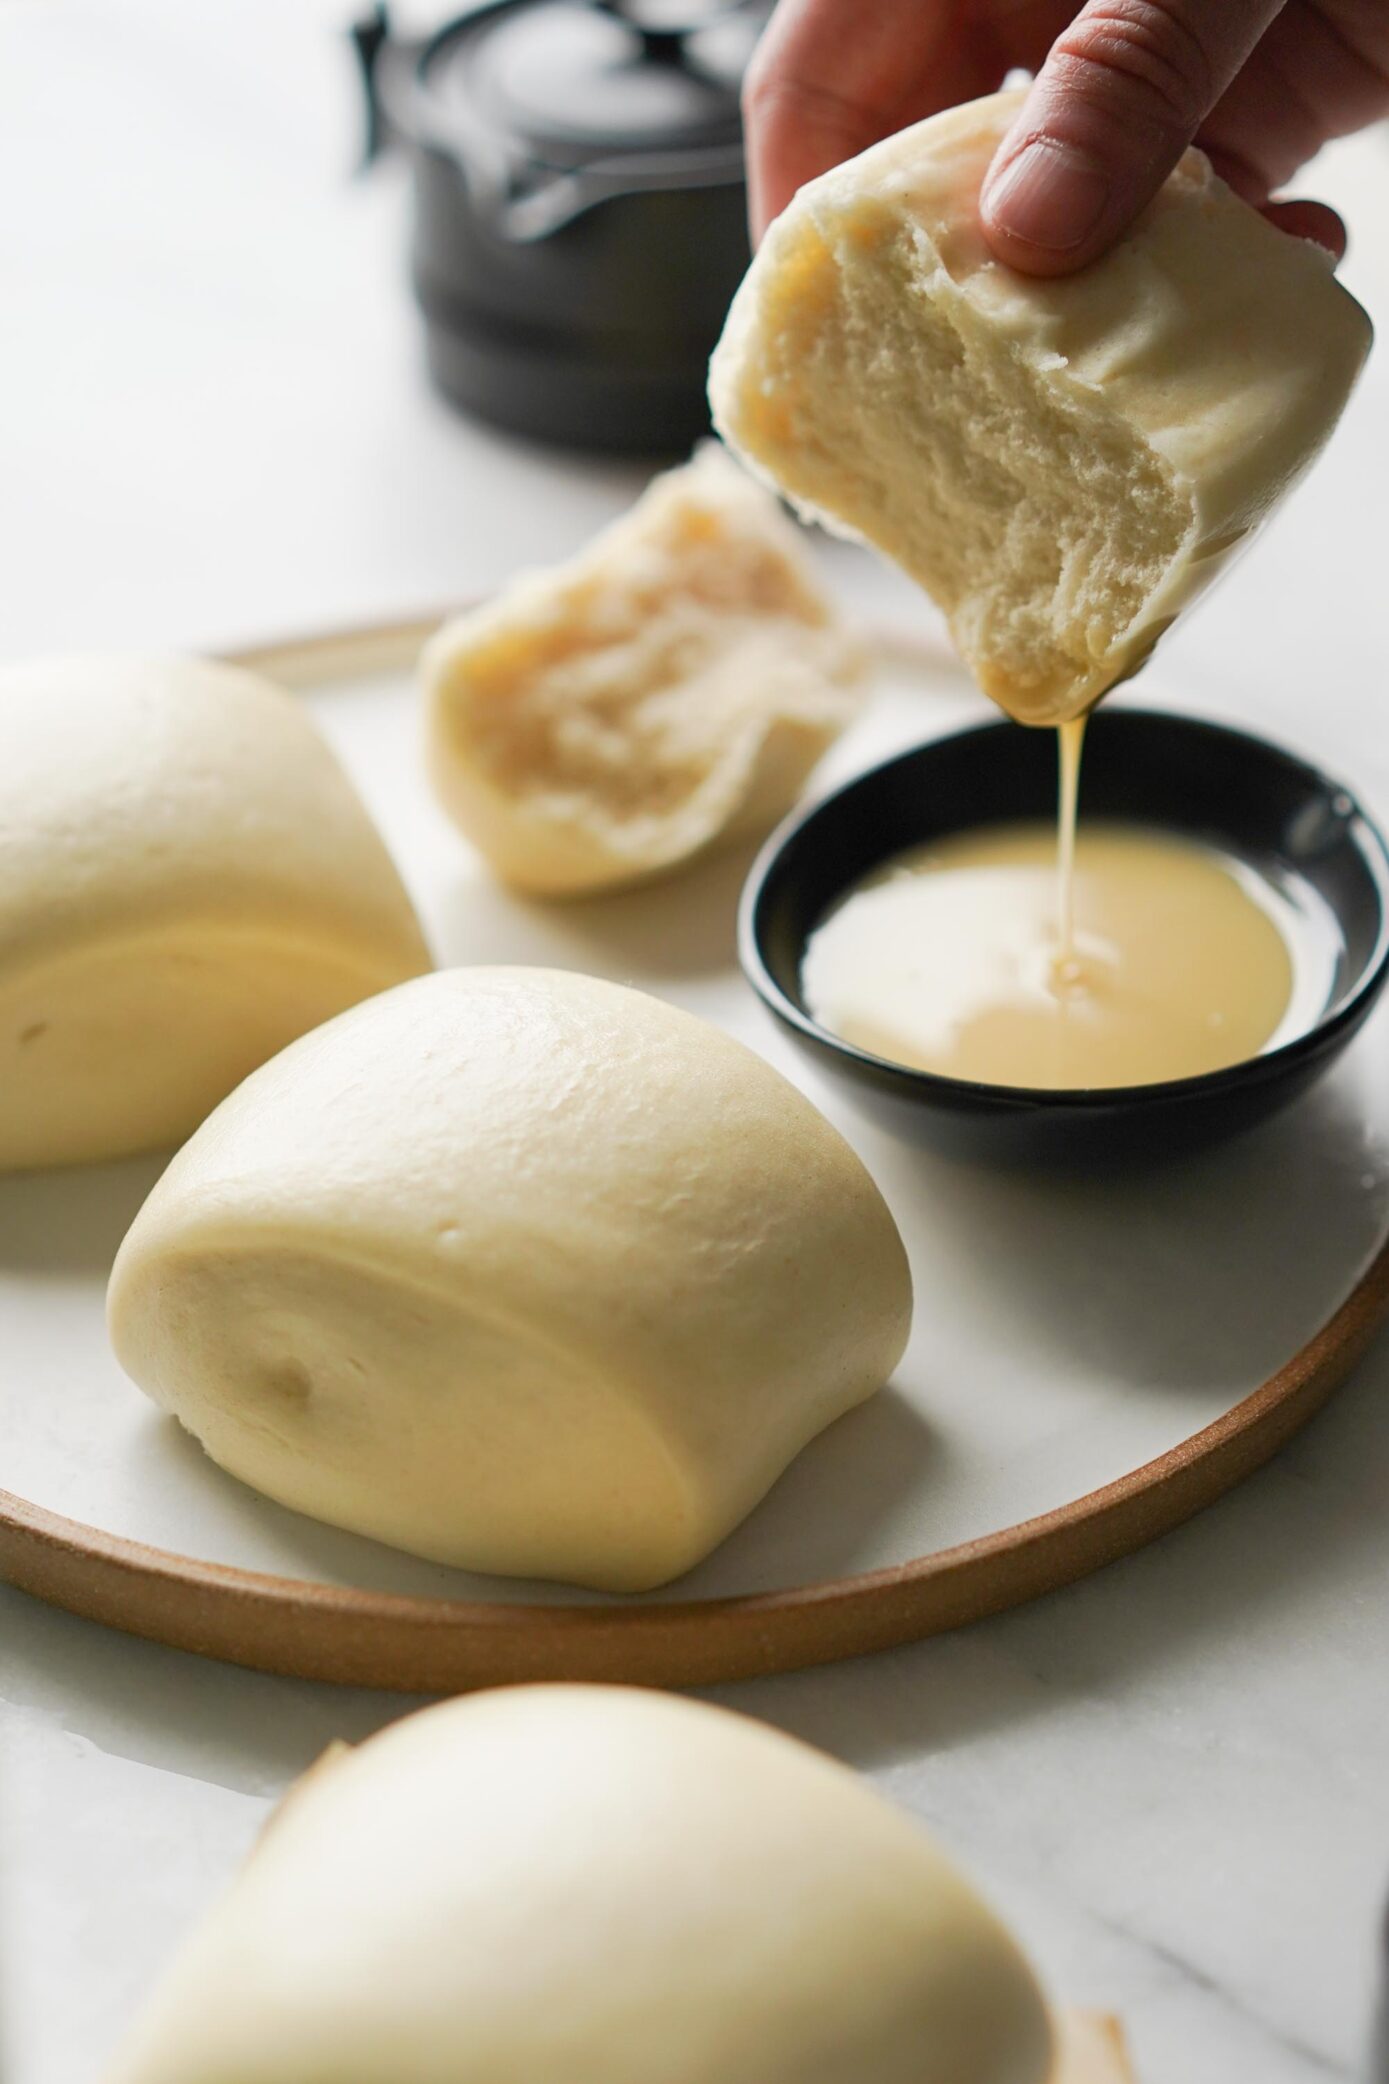 Mantou Recipe (Fluffy Chinese Steamed Buns) - Hungry Huy